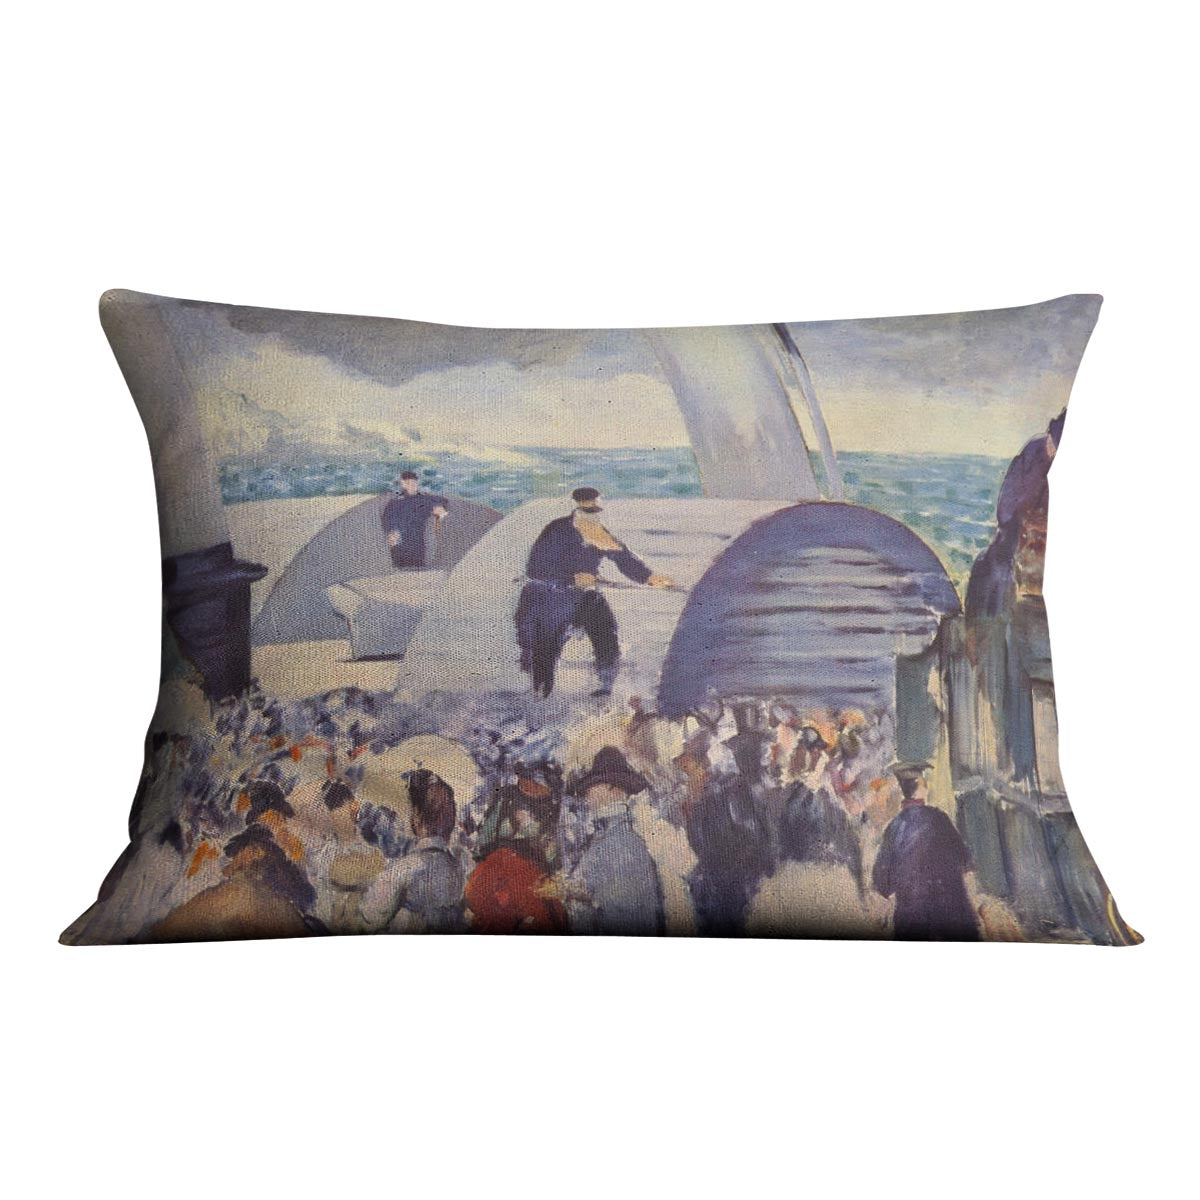 Embarkation after Folkestone by Manet Cushion